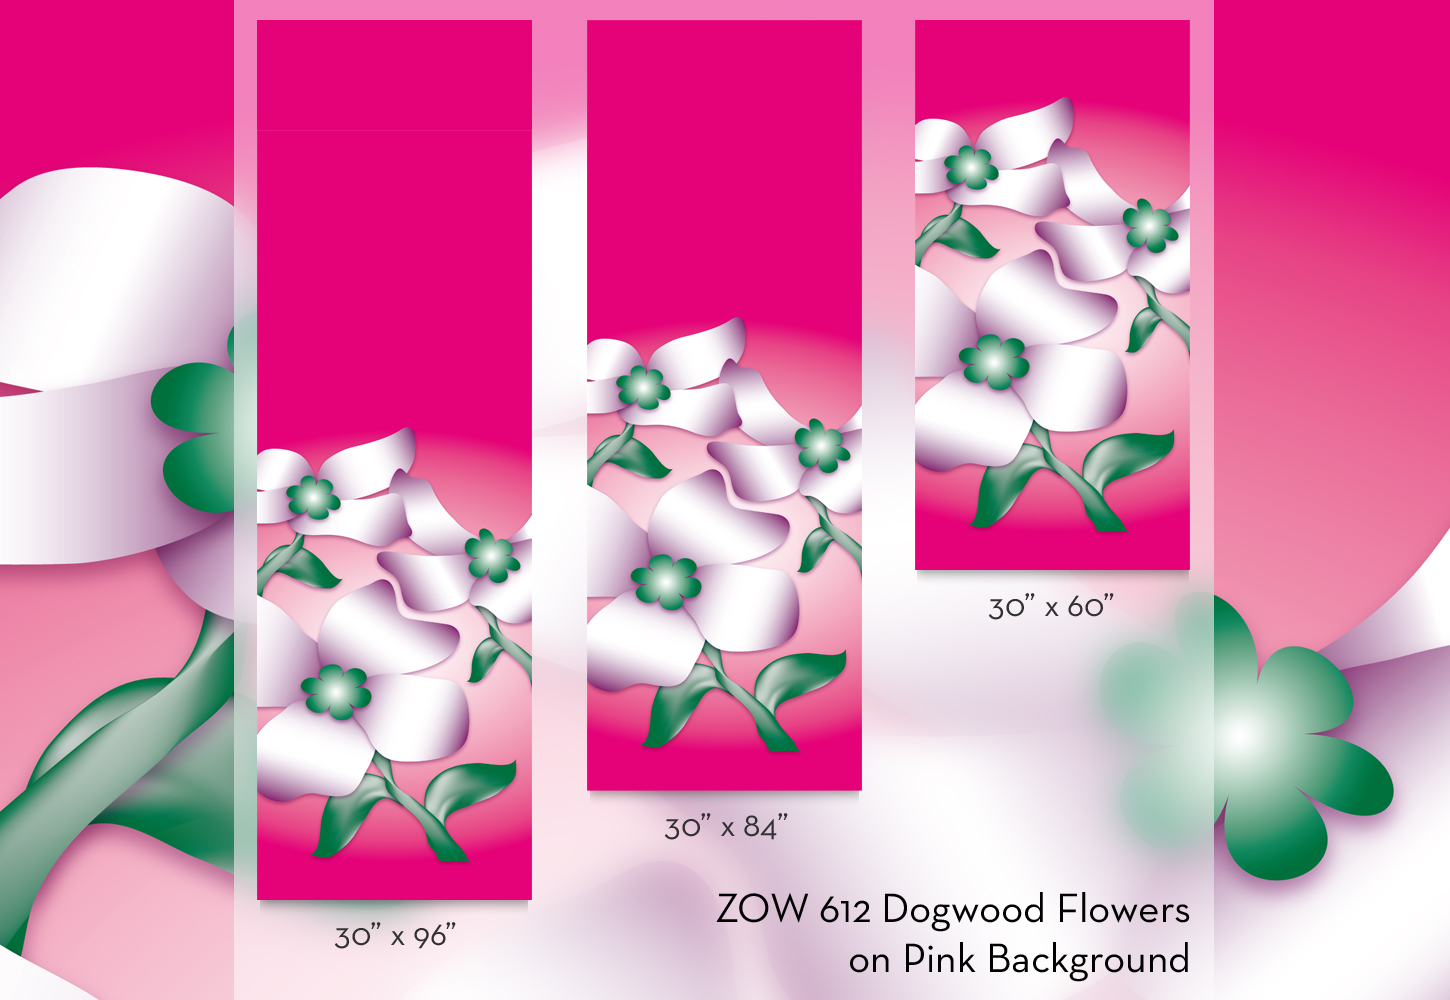 ZOW 612 Dogwood Flowers on Pink Background